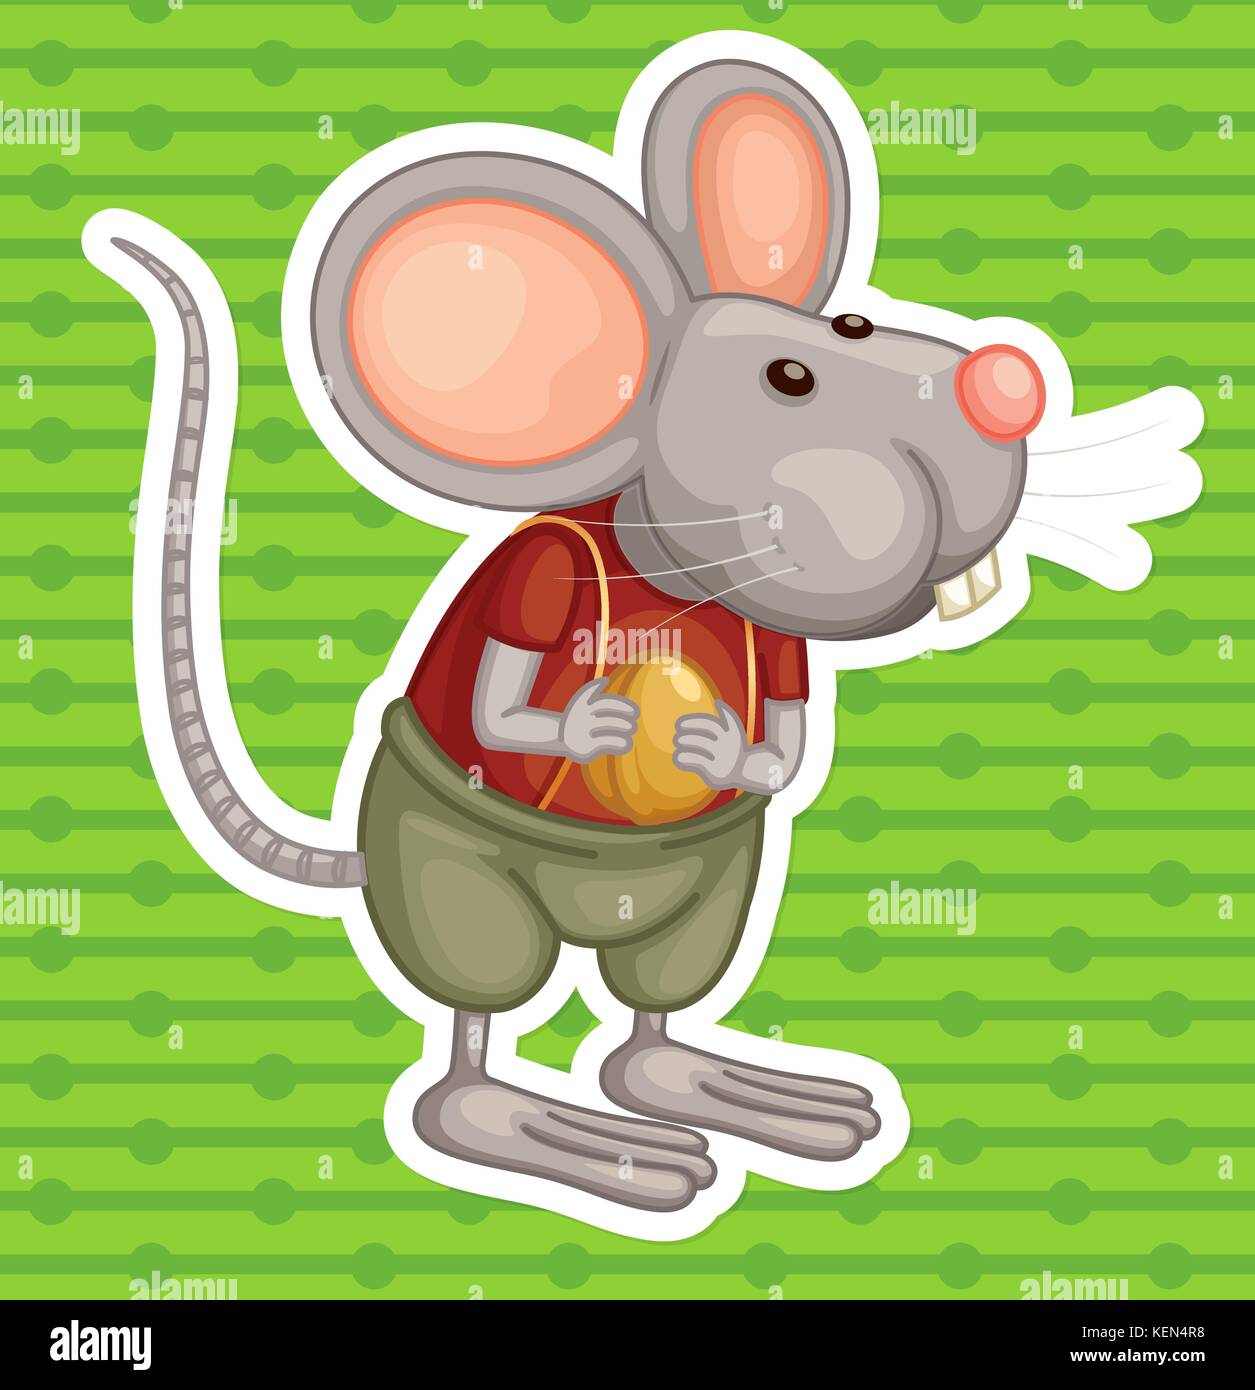 Illustration of a close up mouse Stock Vector